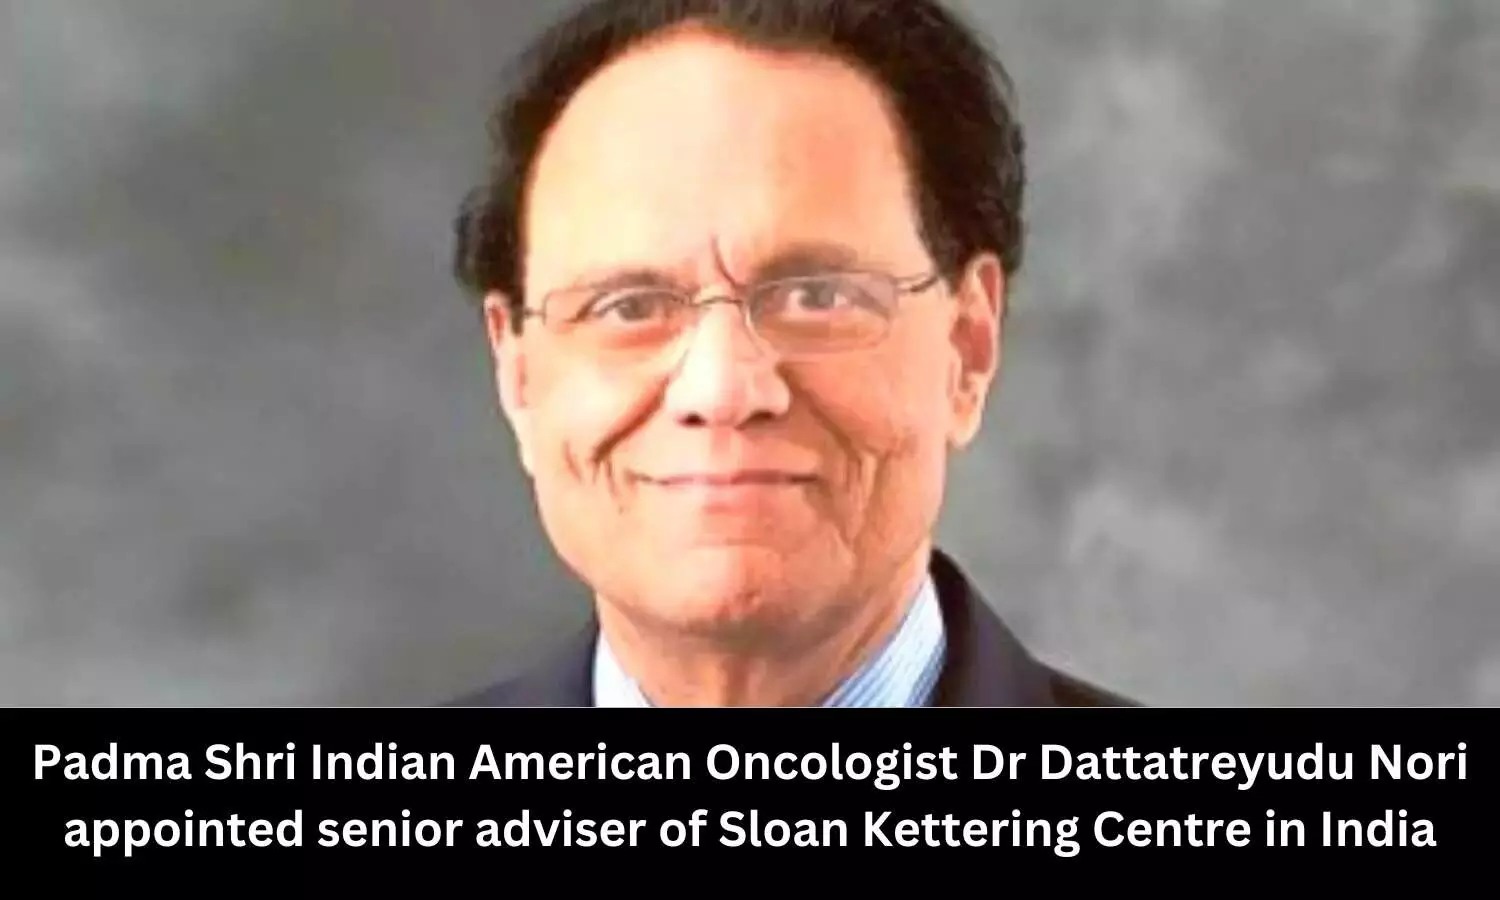 Top Indian American oncologist Dr Dattatreyudu Nori appointed senior adviser to Chennai centre of Sloan Kettering Centre